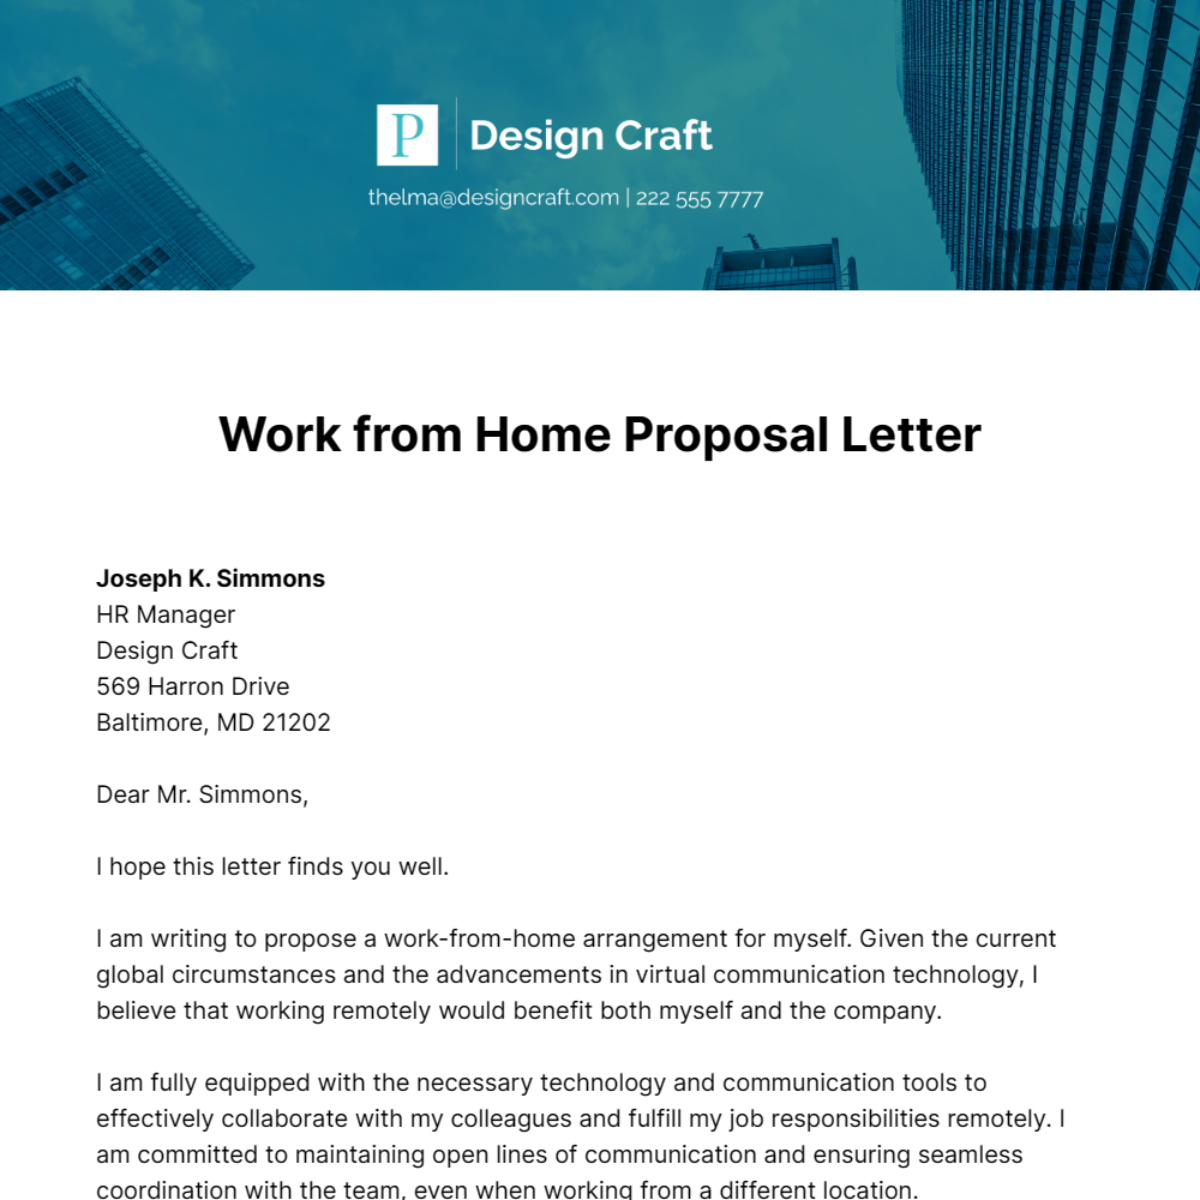 Work from Home Proposal Letter   Template